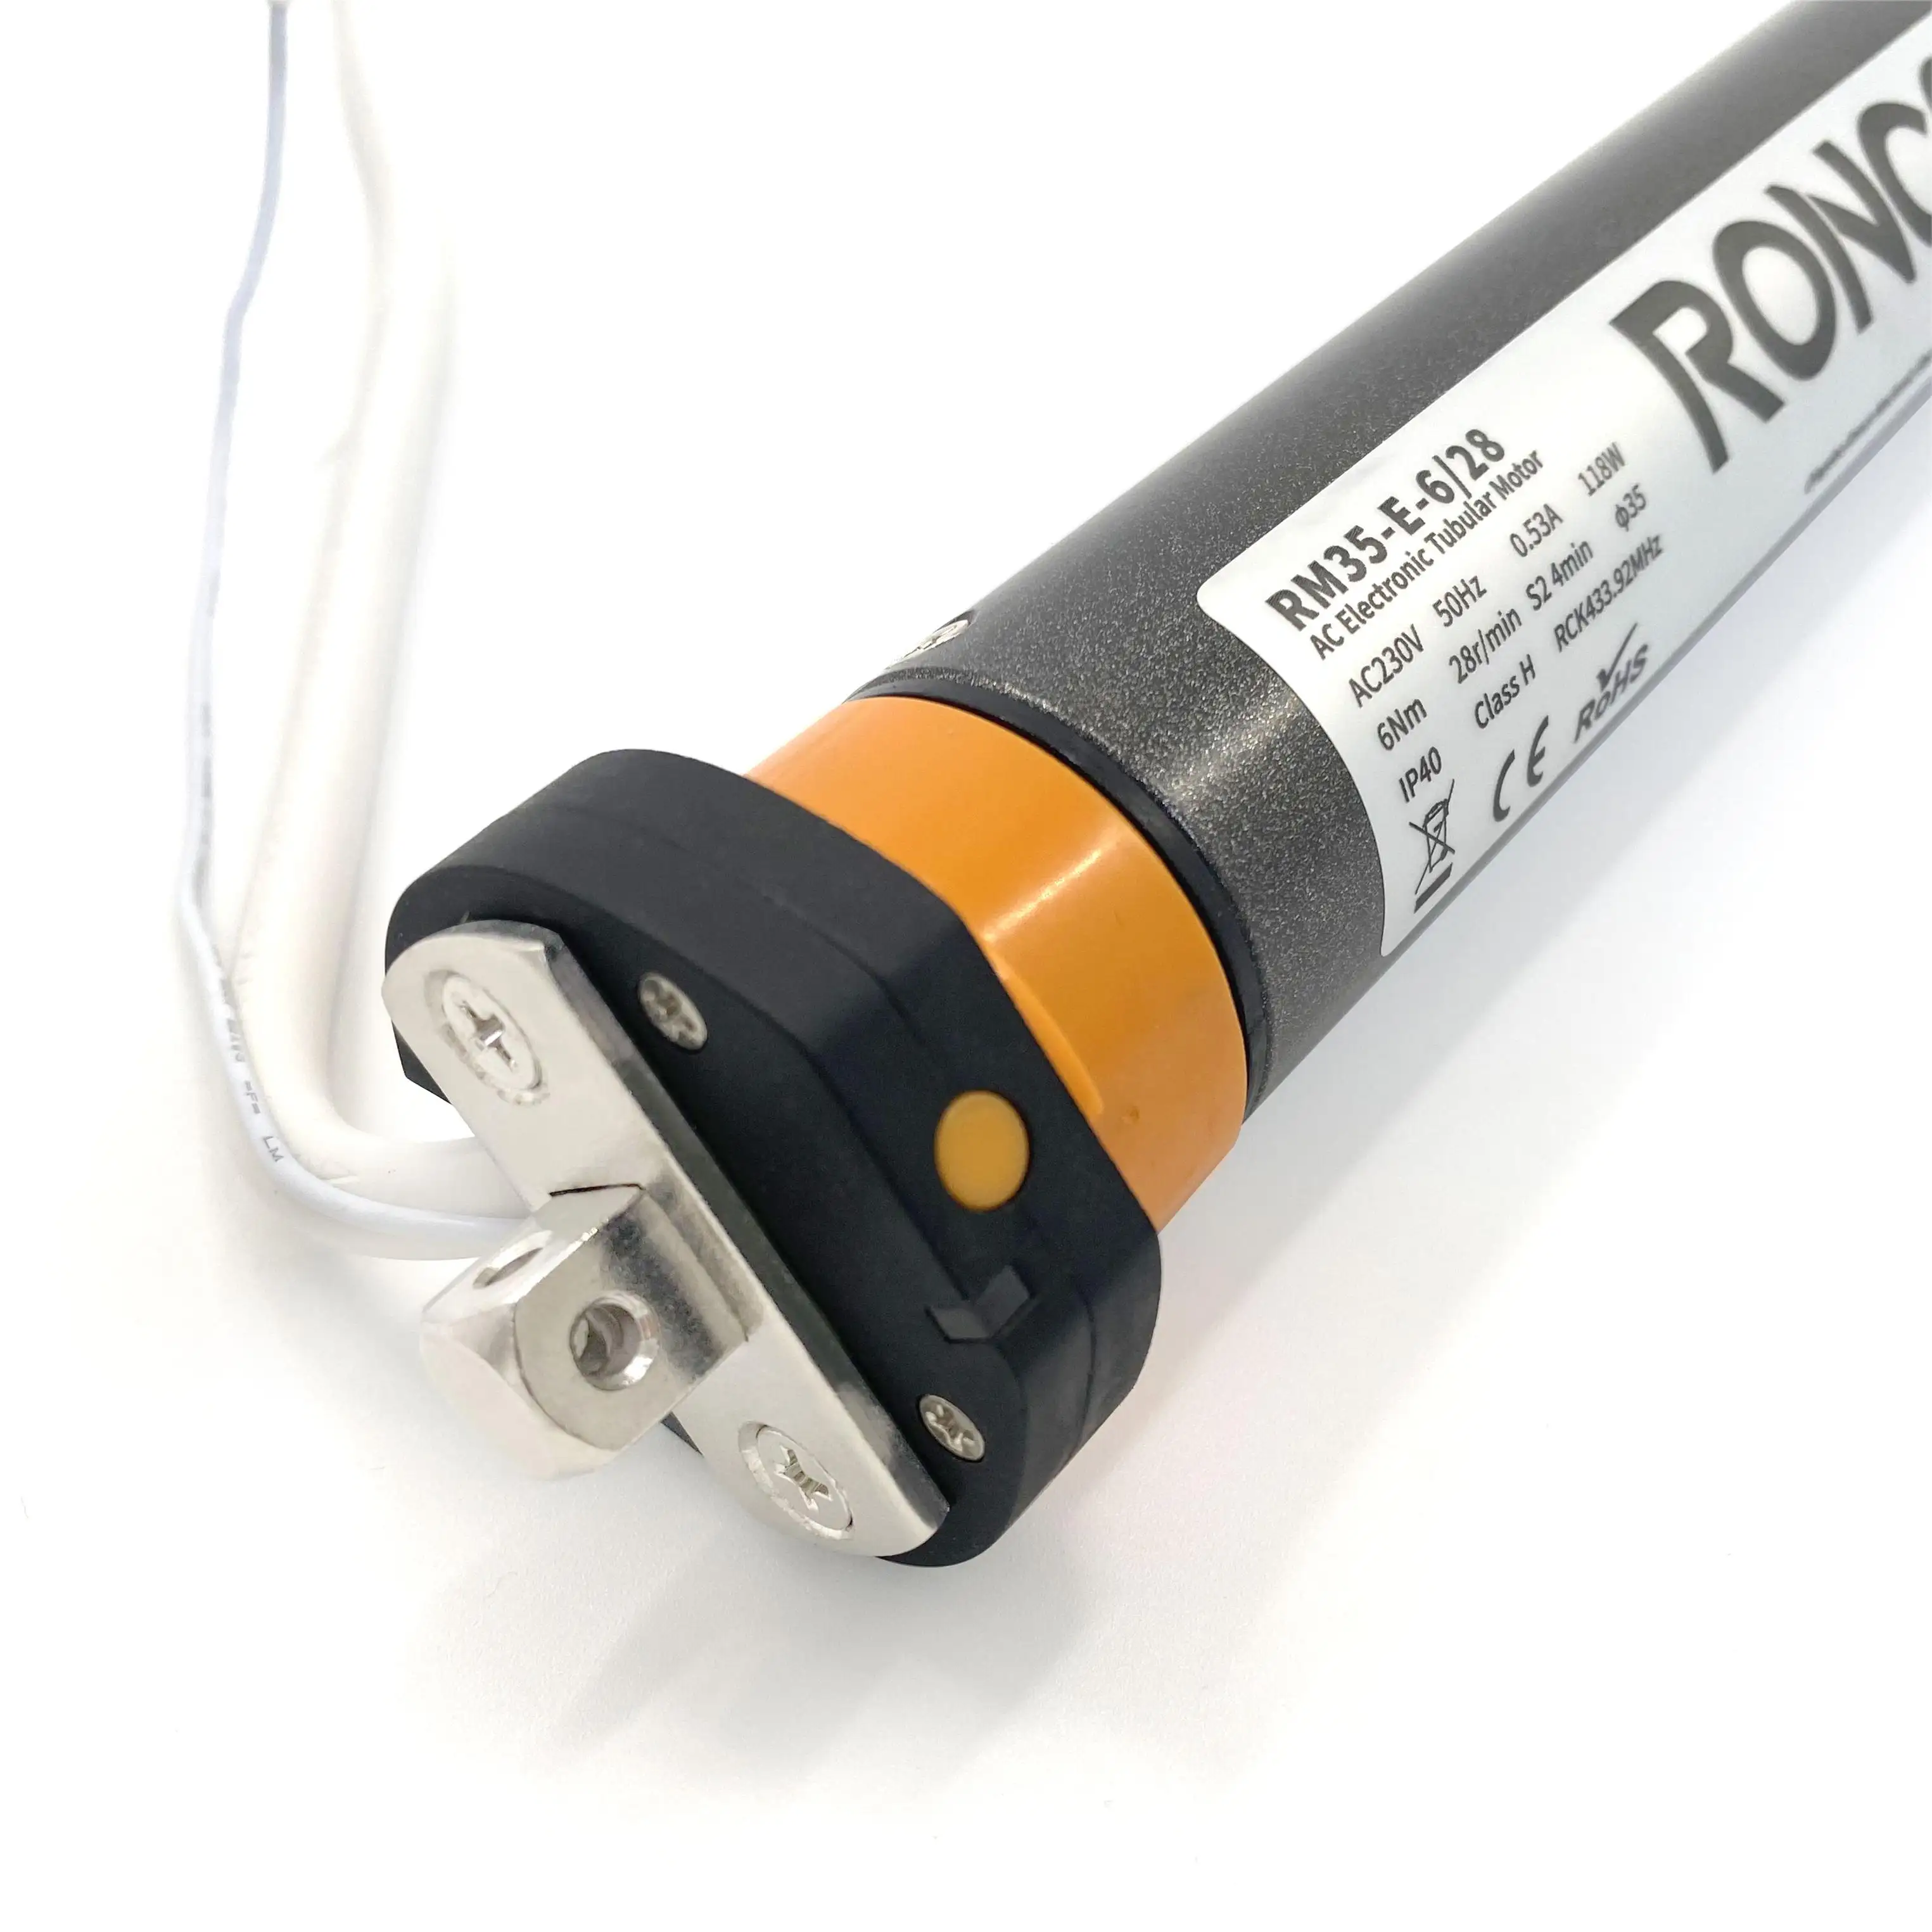 RM35-E 35mm electronic limit smart home low power consumption AC tubular motor for roller shutters zebra blinds